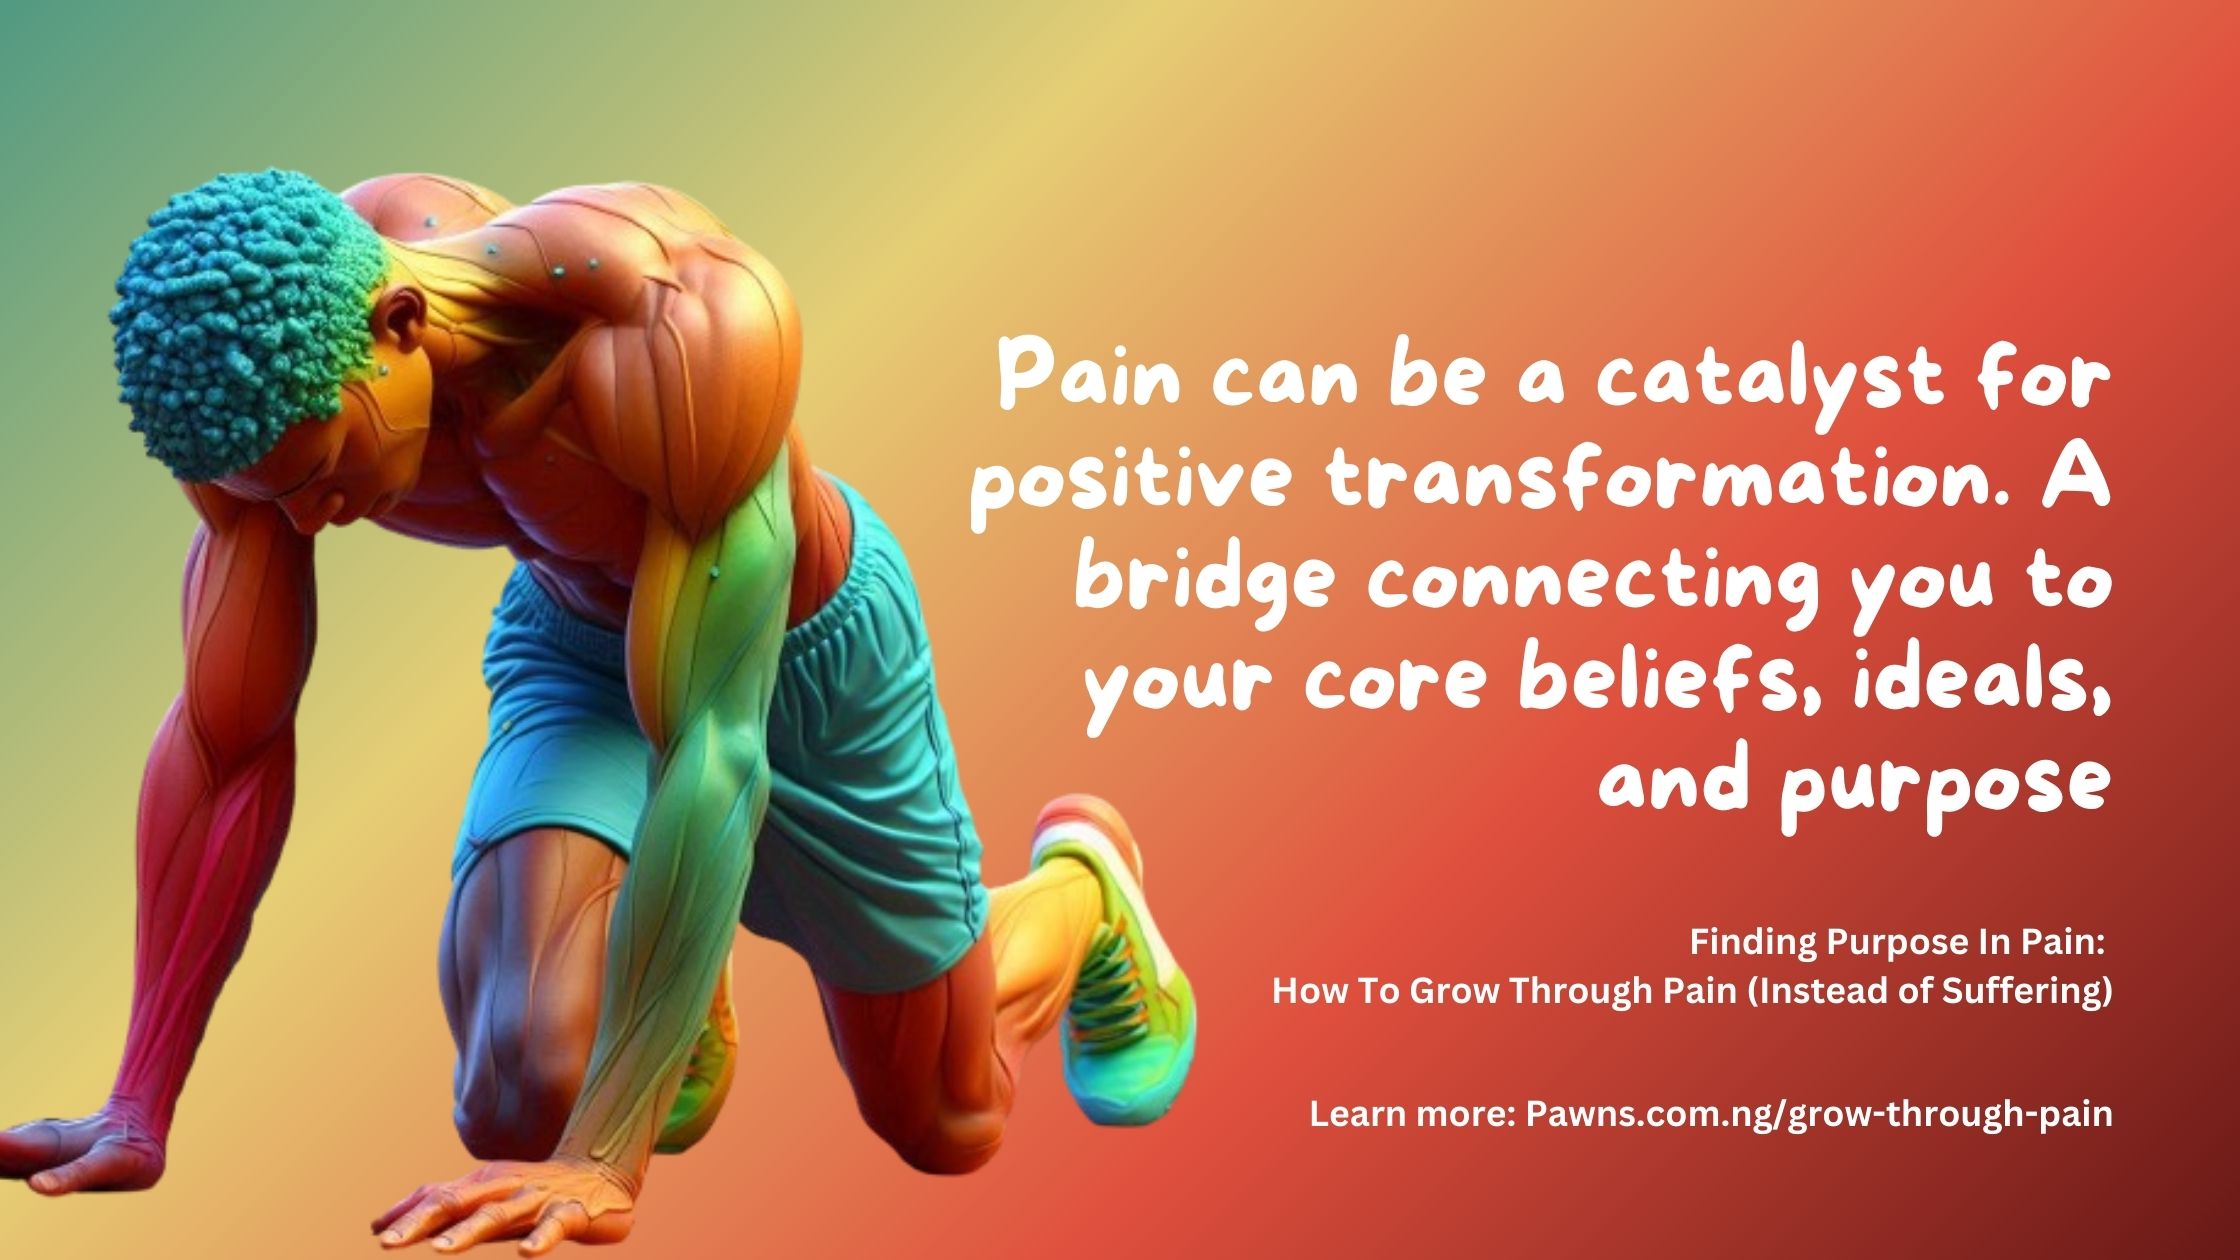 Pain can be a catalyst for positive transformation. A bridge connecting you to your core beliefs, ideals, and purpose Finding Purpose In Pain How To Grow Through Pain instead of Suffering